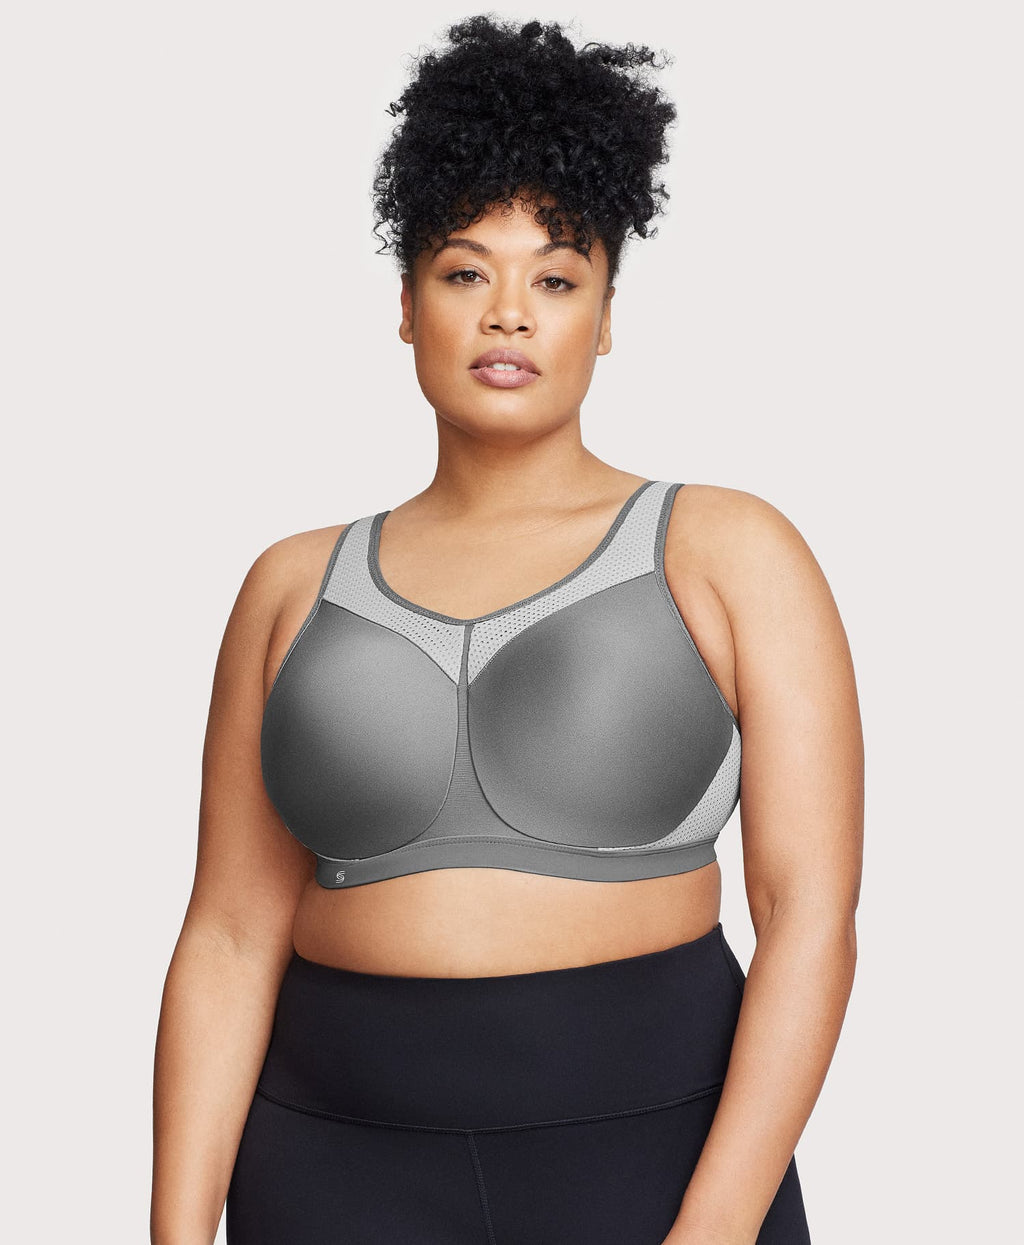 Glamorise on X: New year, new goals, new sports bras 🙌 What are